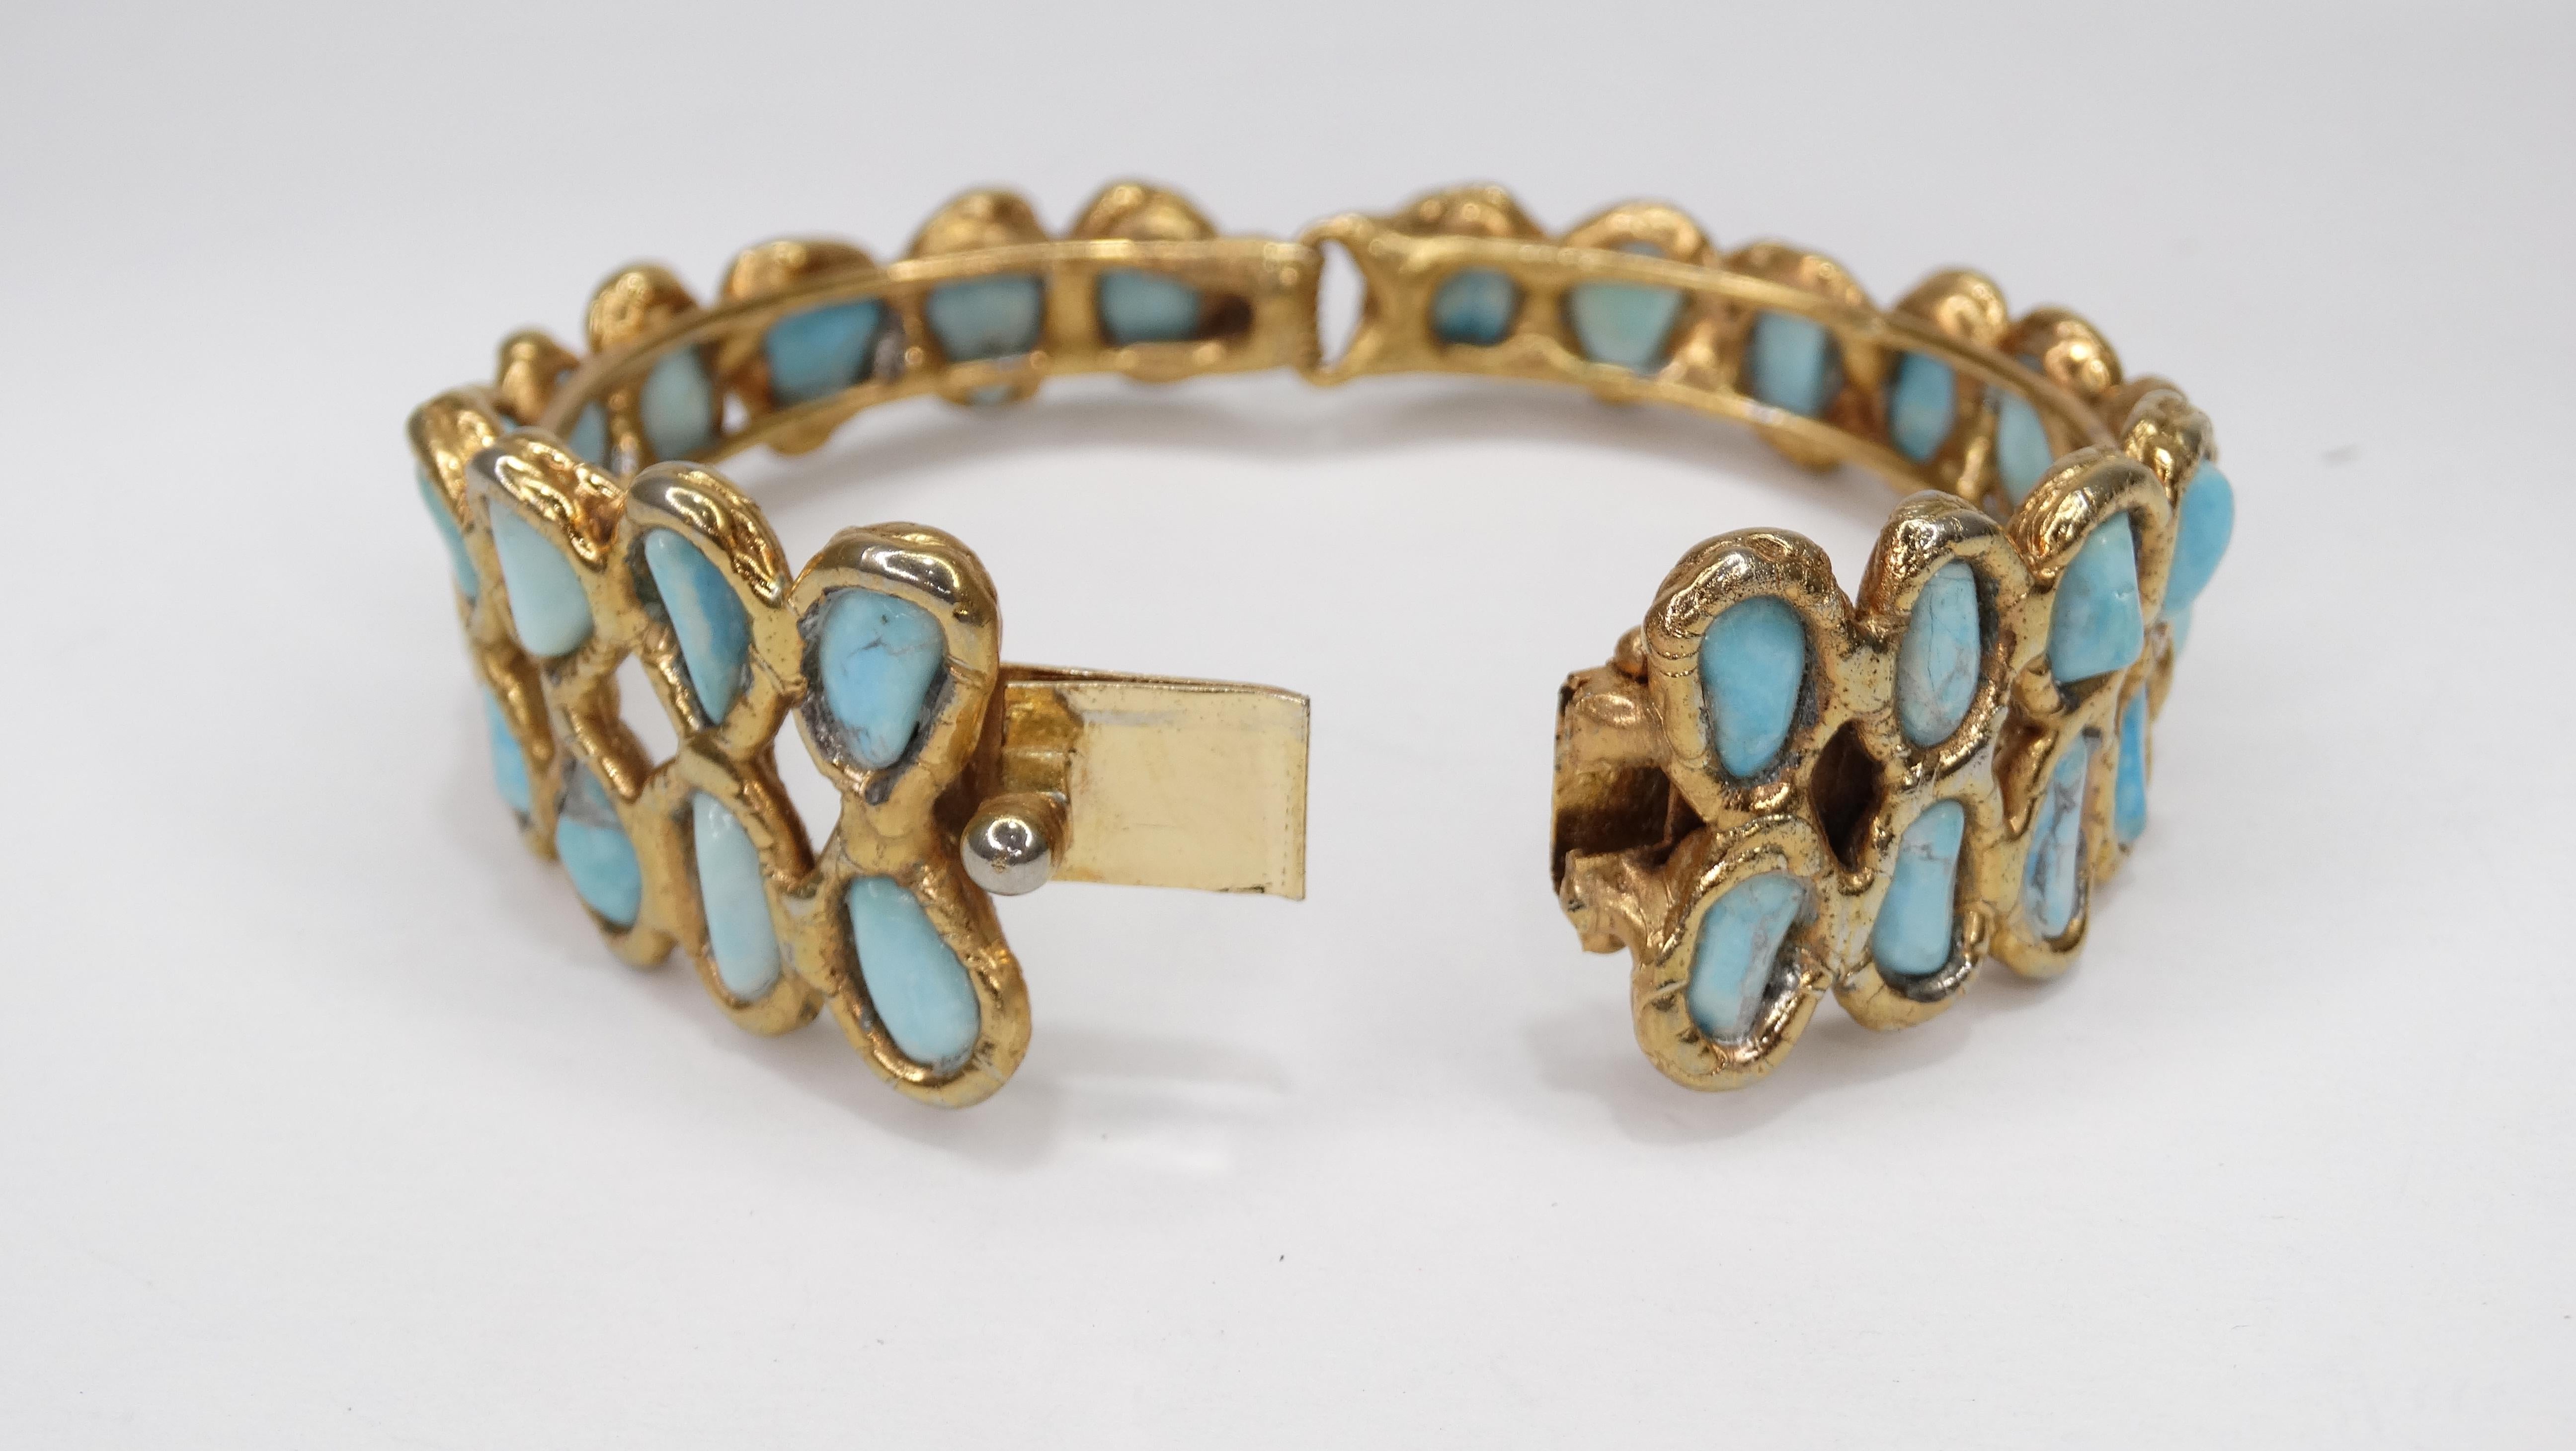 Add some color to your summer looks with this gorgeous cuff! Circa late 20th century, this cuff is crafted from sterling silver plated in gold and finished with two rows of rough-cut Turquoise. Box tab insert closure stamped 925. Unique and a true